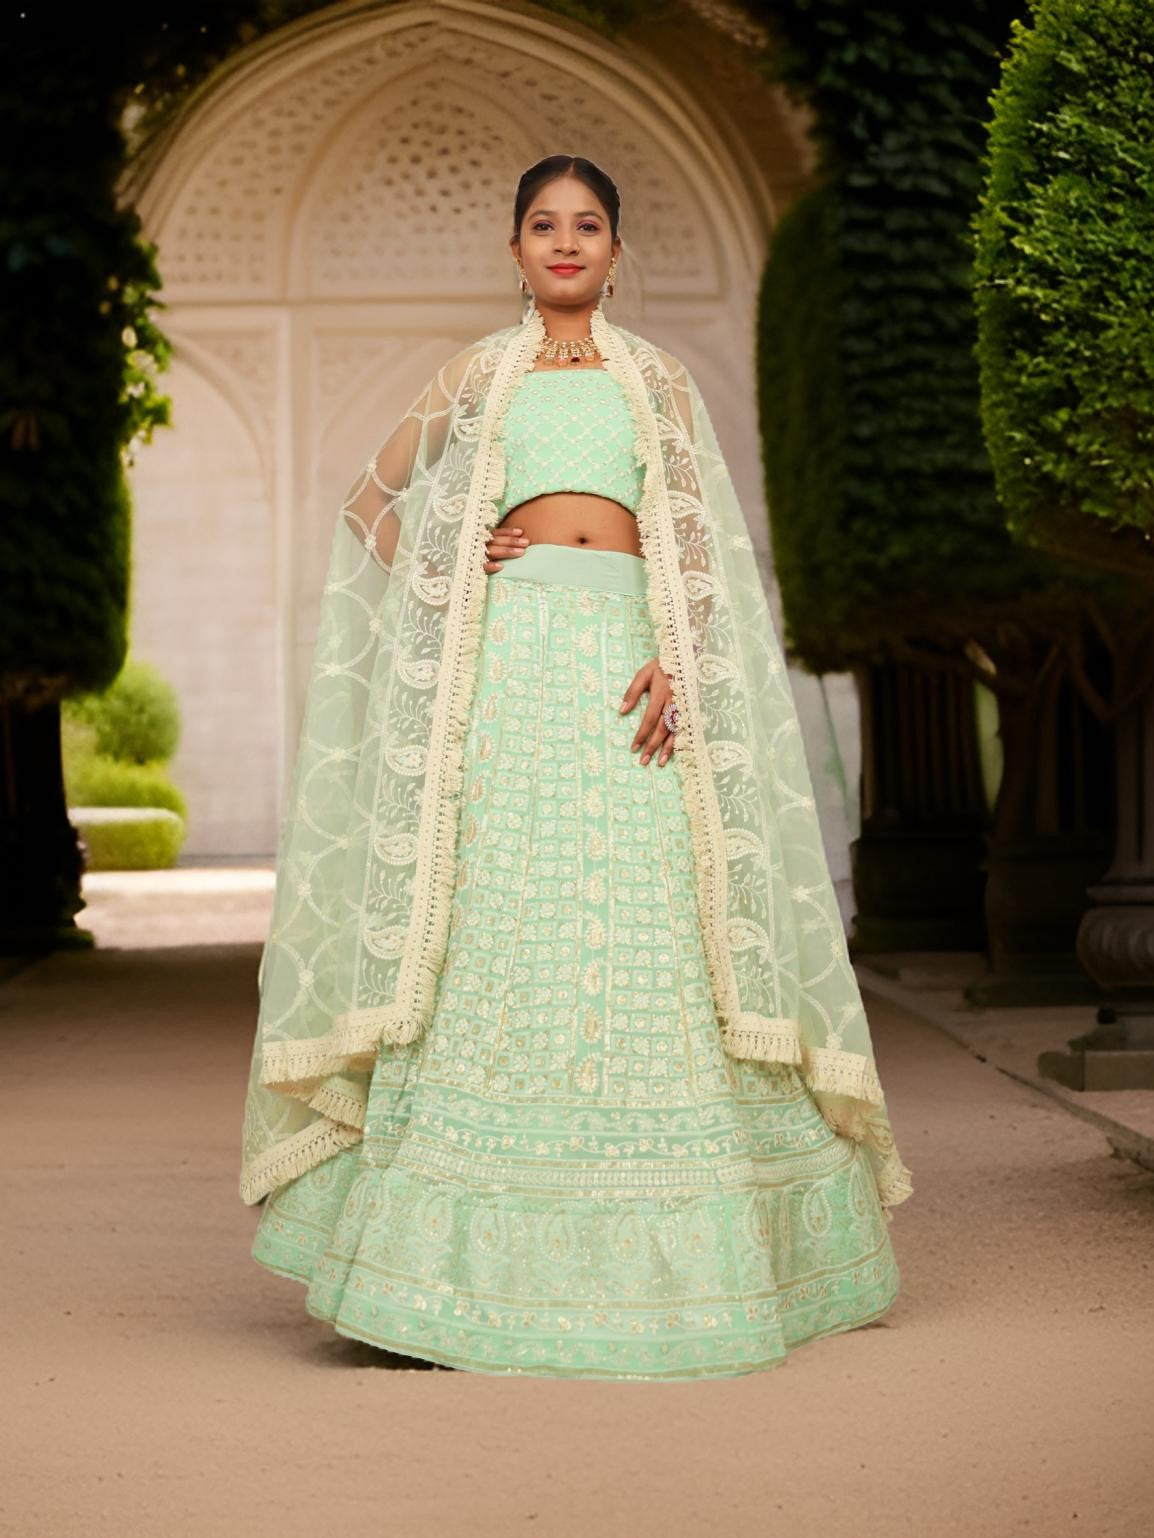 Semi-Stitched Lehenga with Embroidery &amp; Golden Sequin work by Shreekama D. Pista Green Semi-Stitched Lehenga for Party Festival Wedding Occasion in Noida